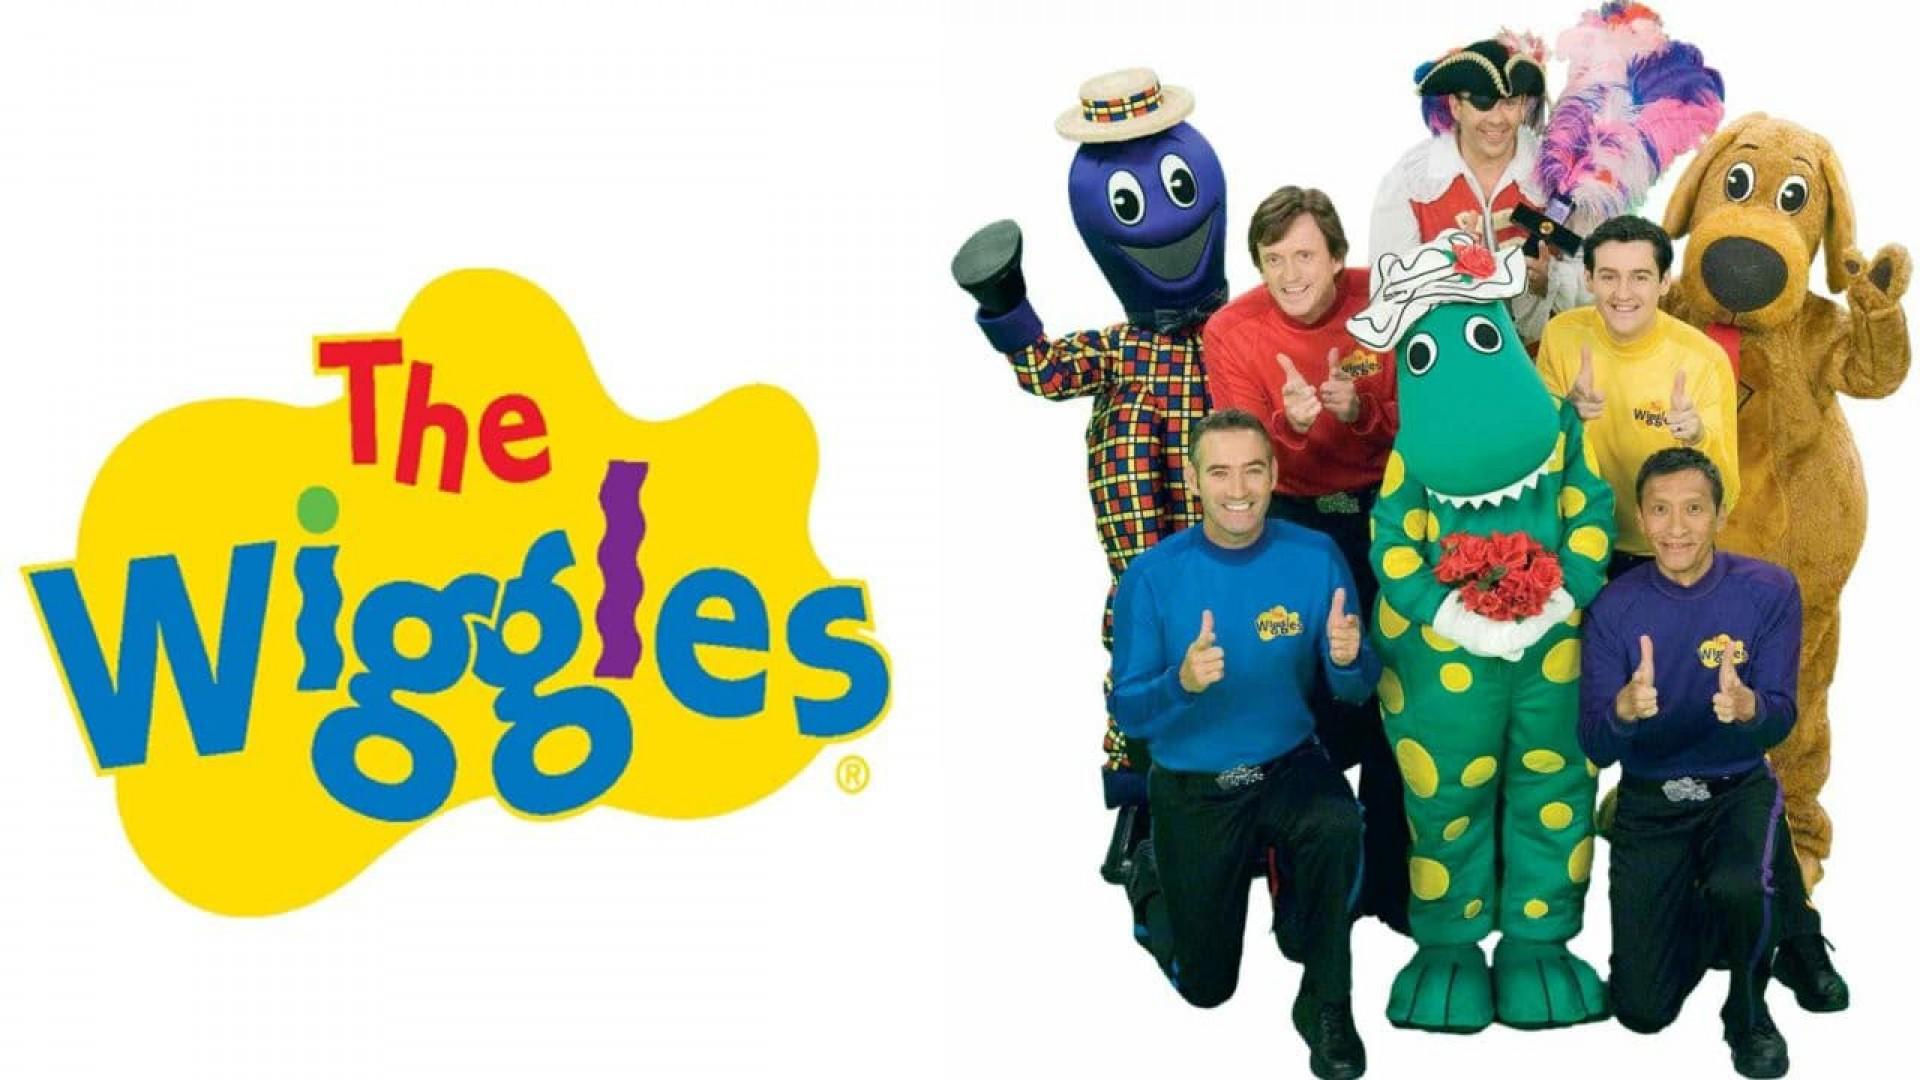 The Wiggles: Whoo Hoo! Wiggly Gremlins!